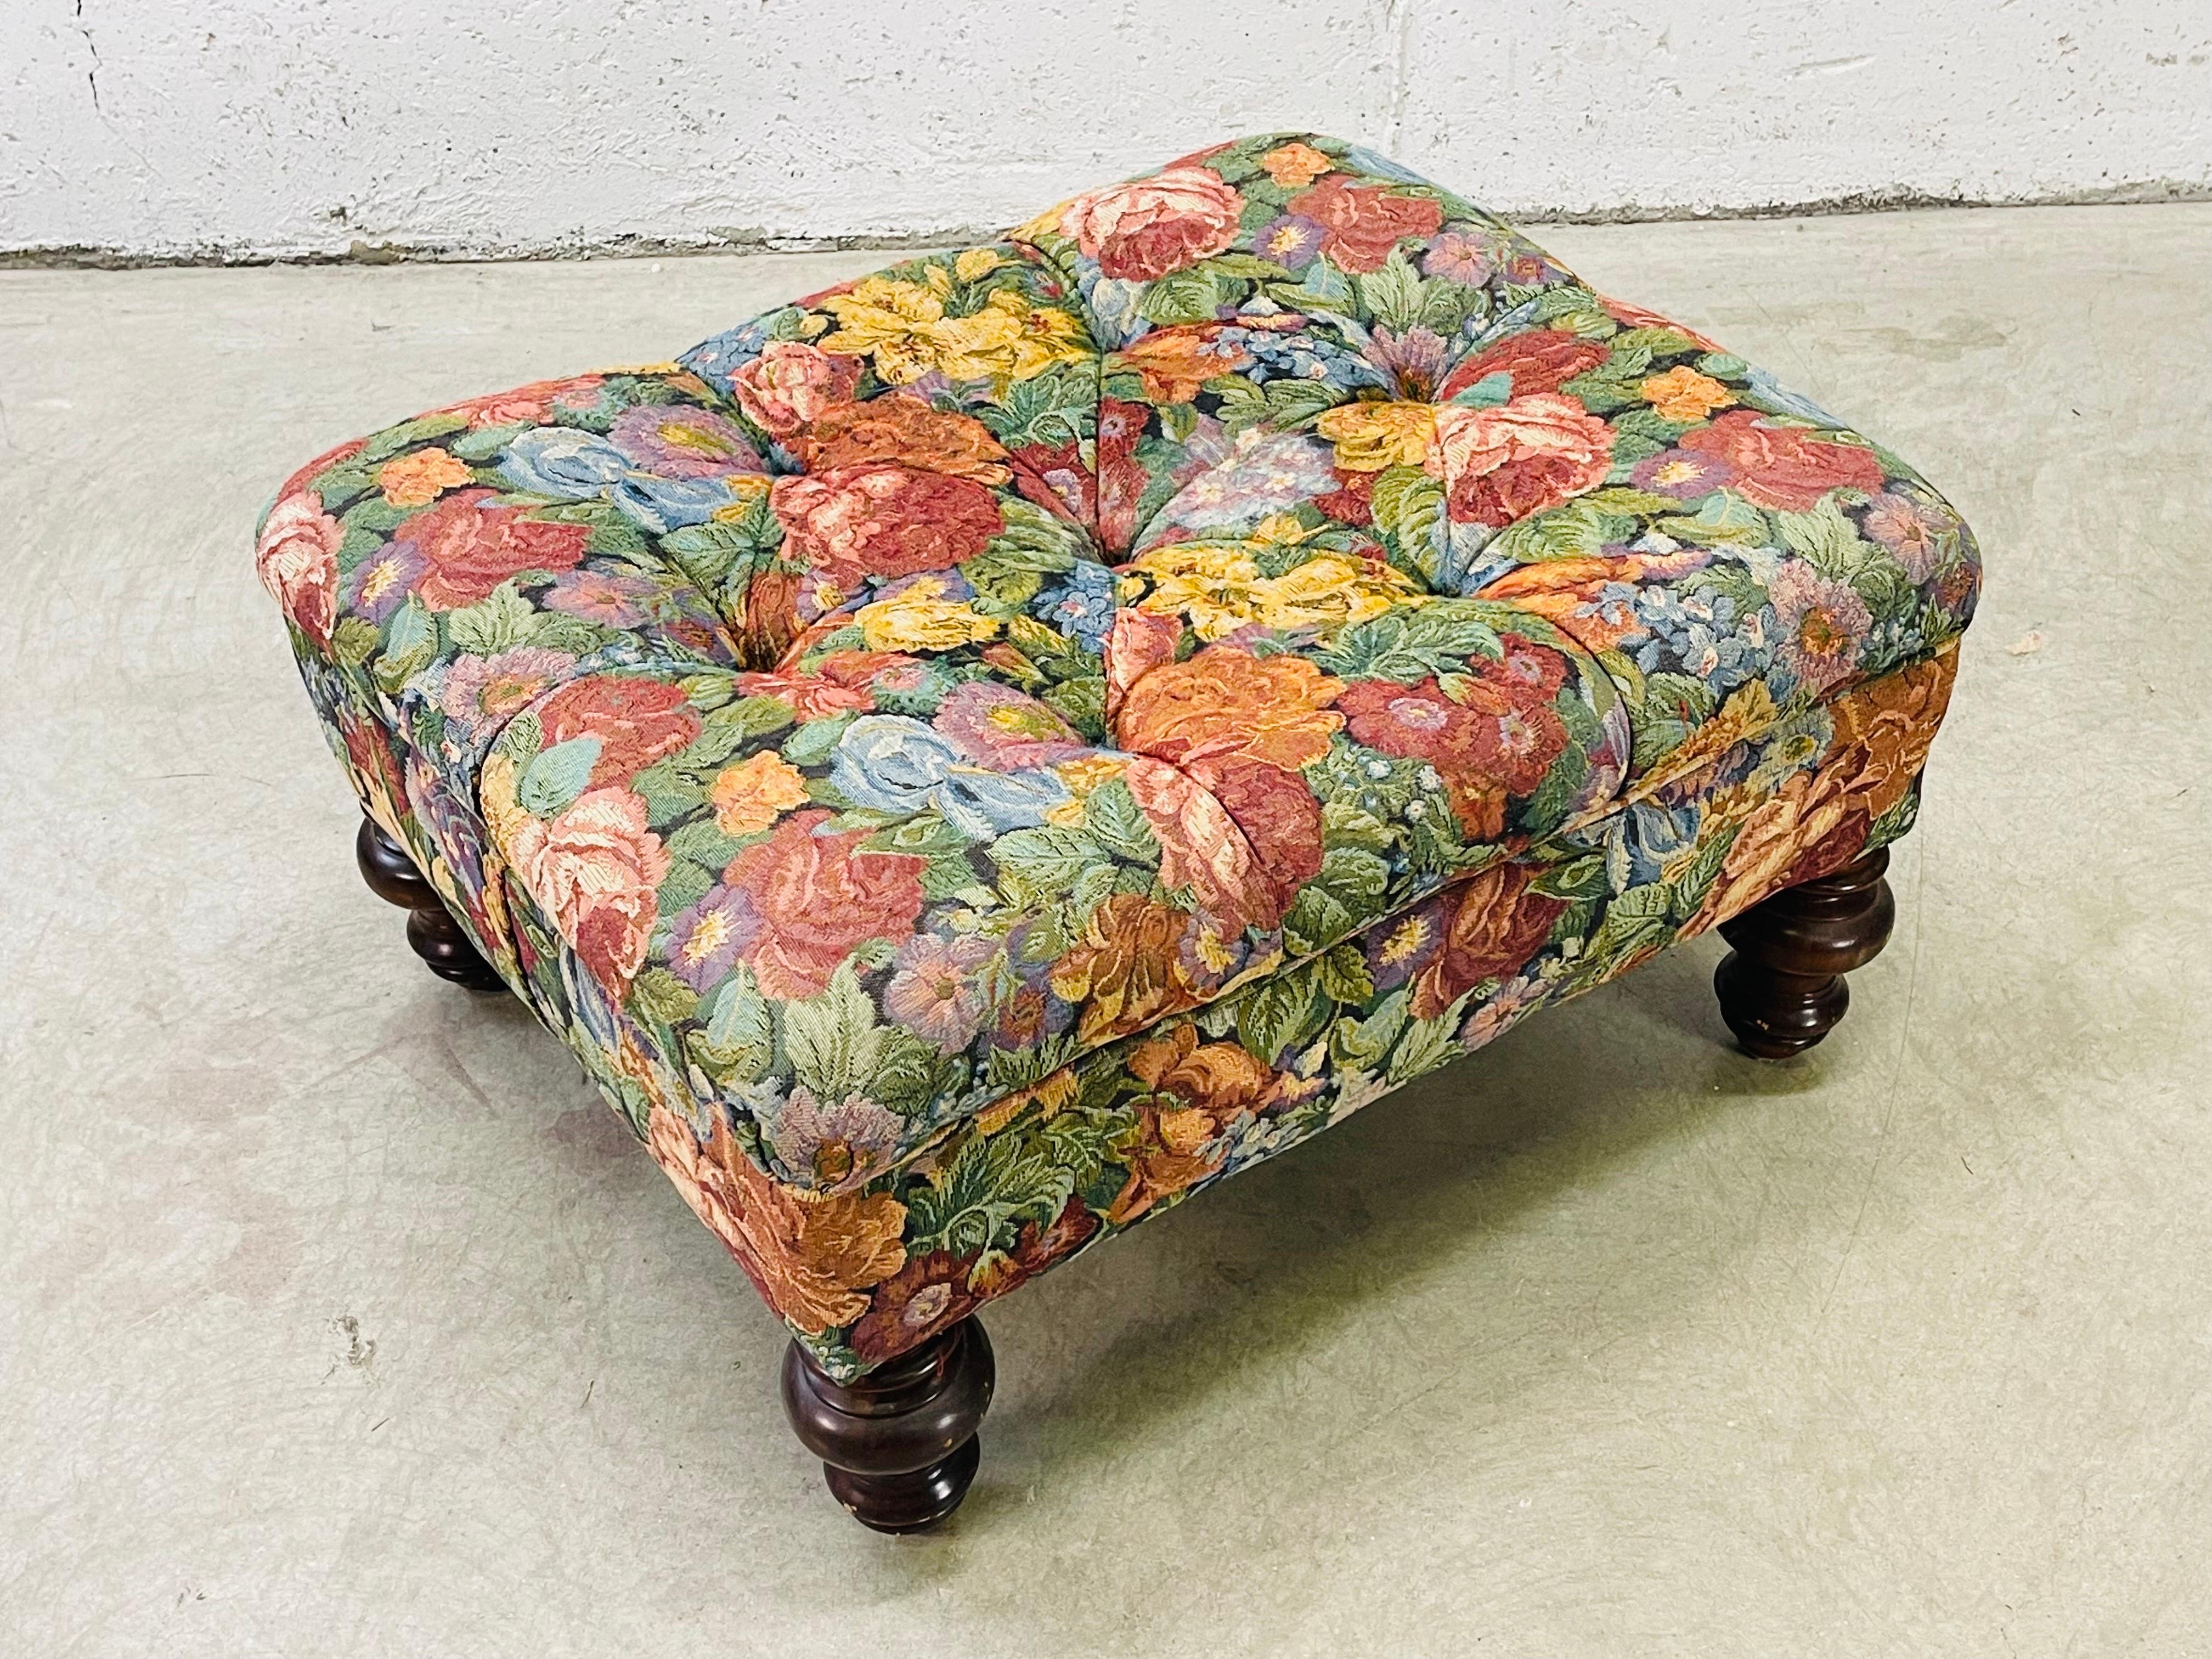 Vintage 1980s rectangular tufted ottoman with round wood legs. The ottoman has a floral fabric that needs to be replaced. The ottoman is solid and sturdy. No marks.